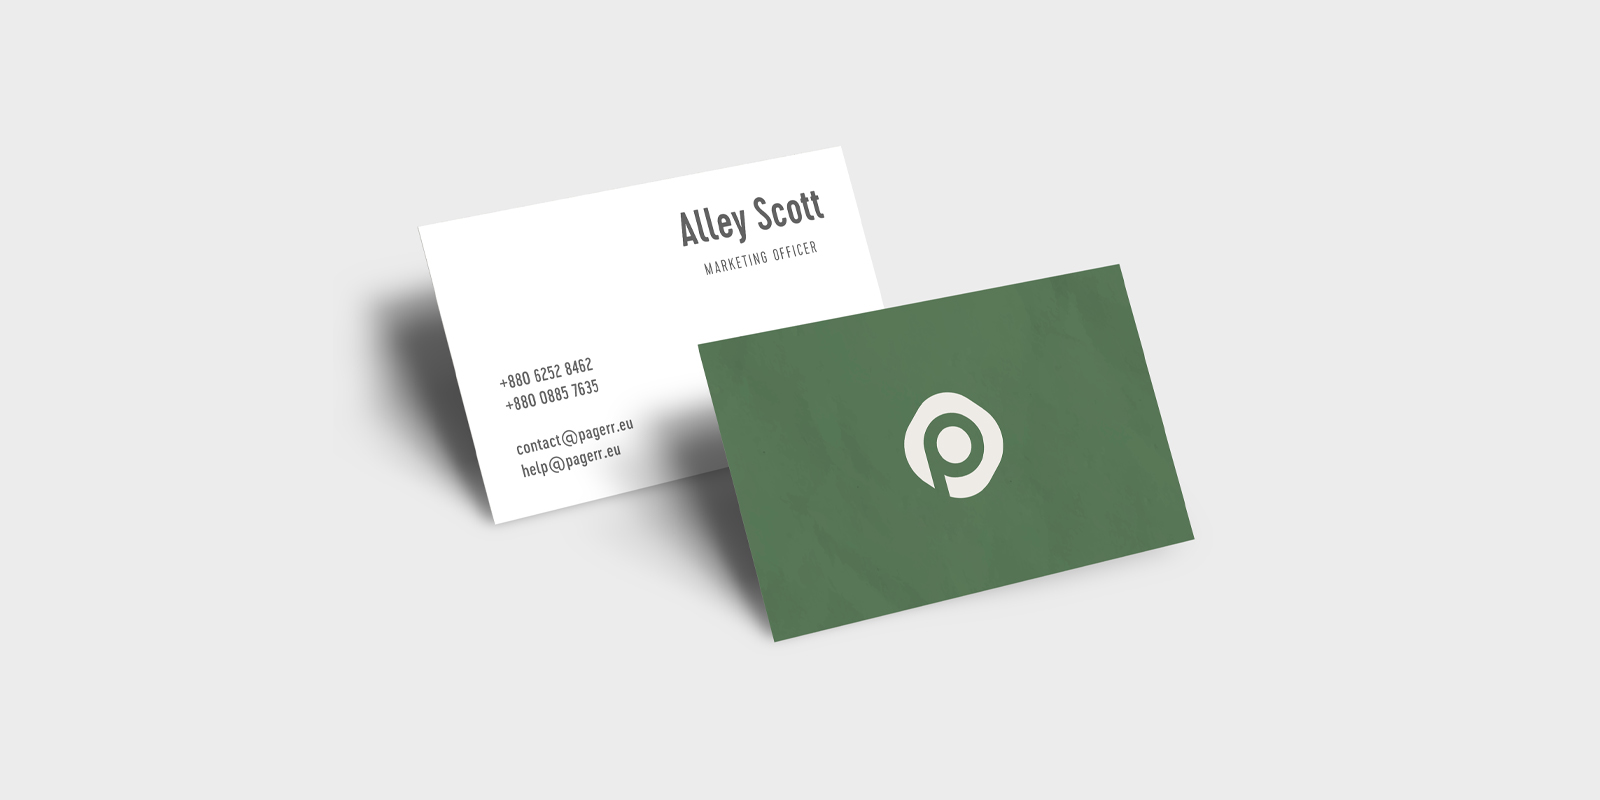 Simple business cards in Hamburg - Print with Pagerr